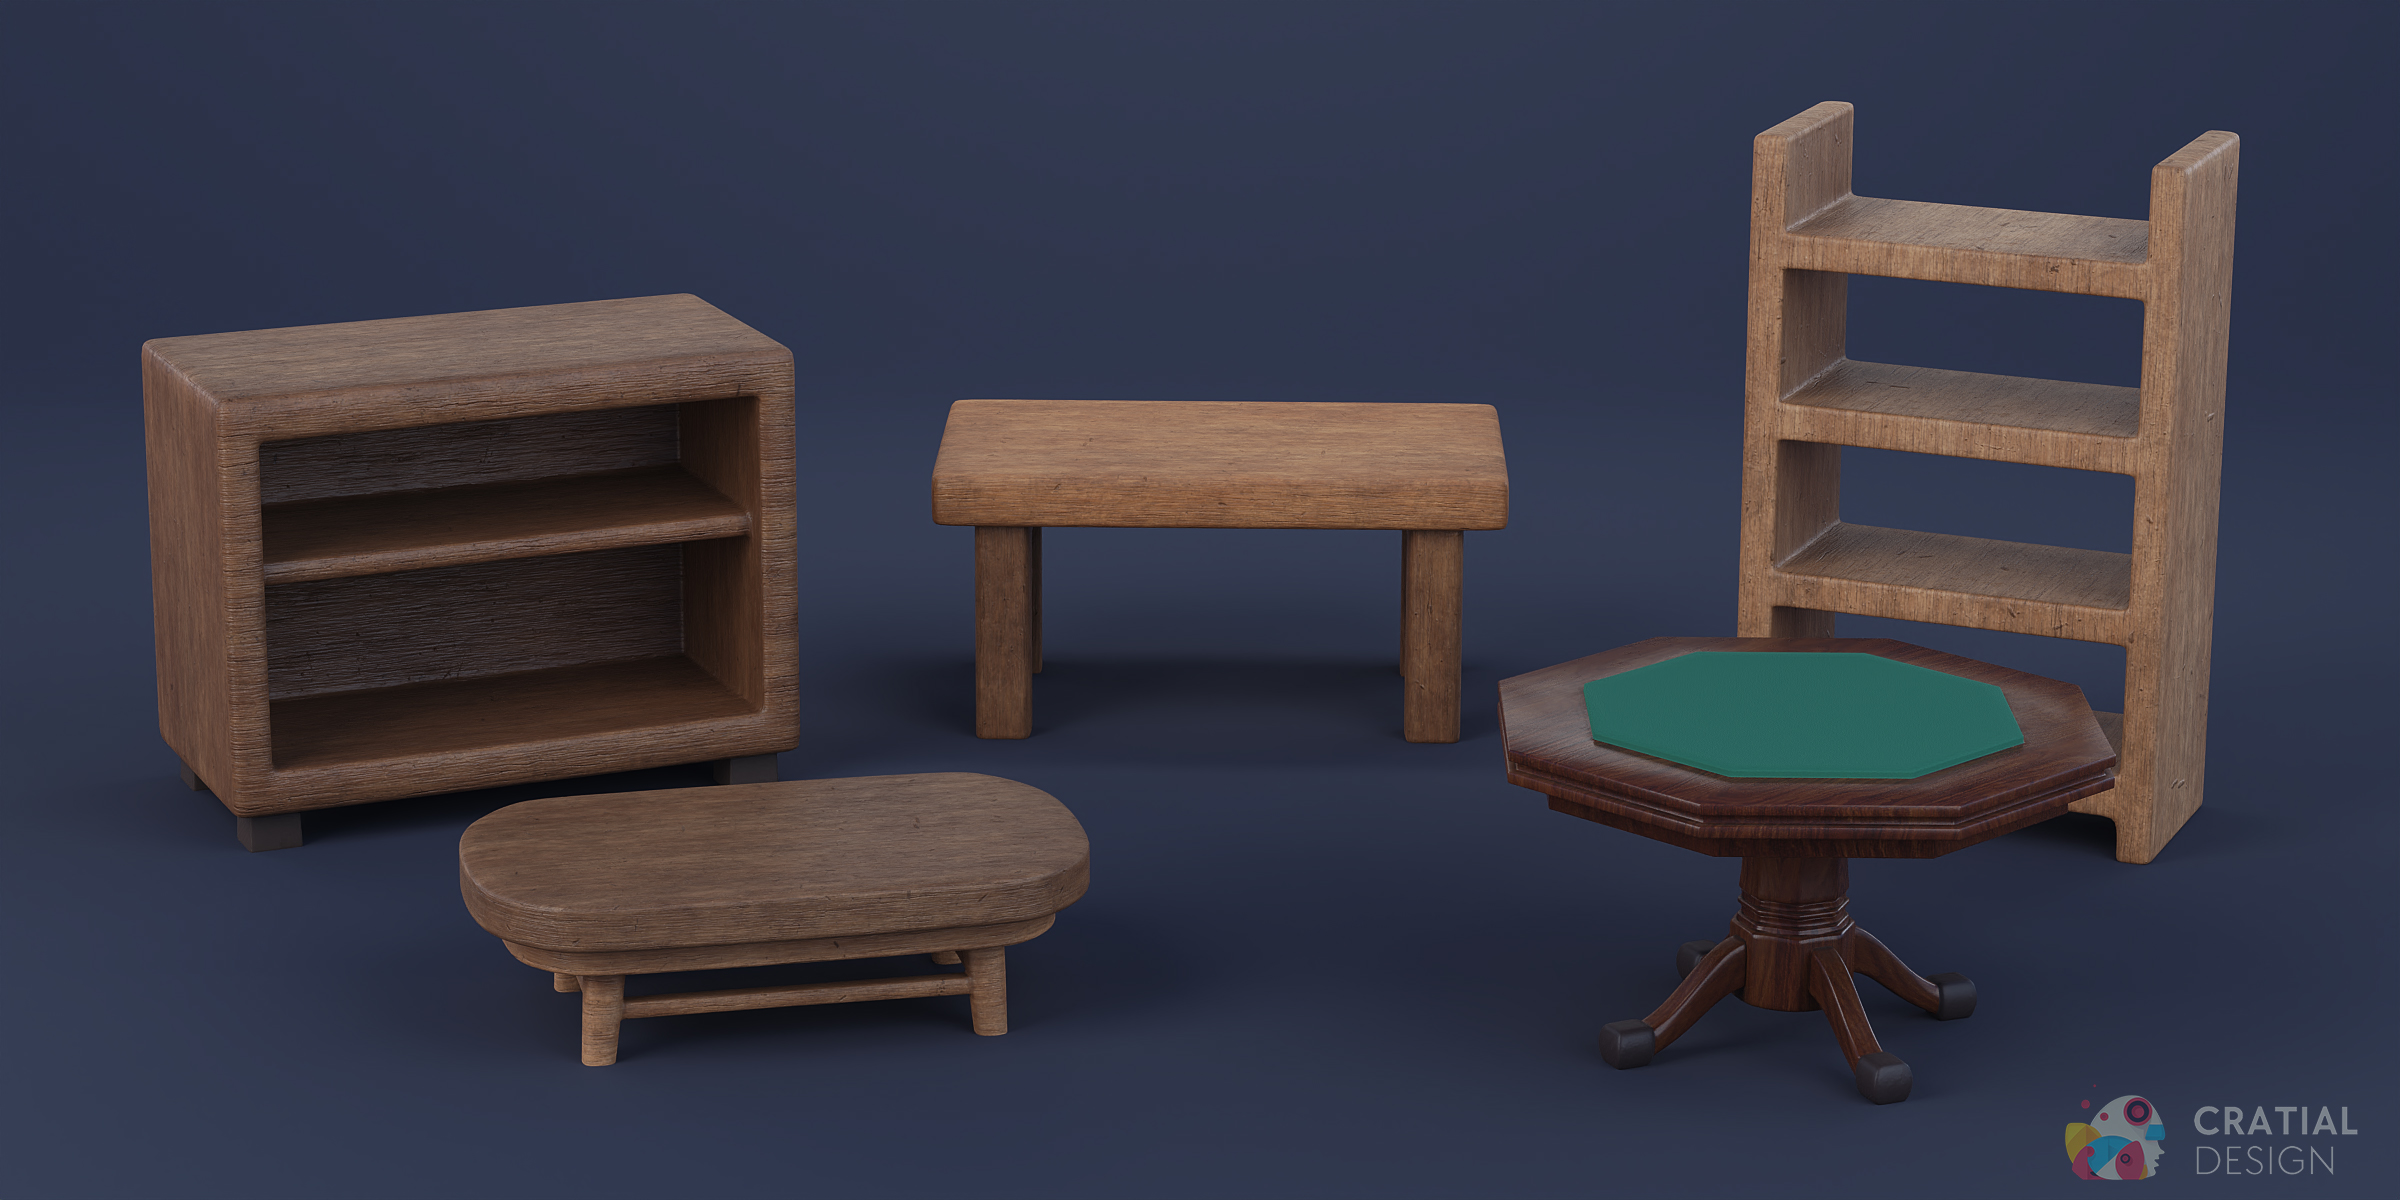 Cratial 3D - Stylized Interior Tables and Shelving Models